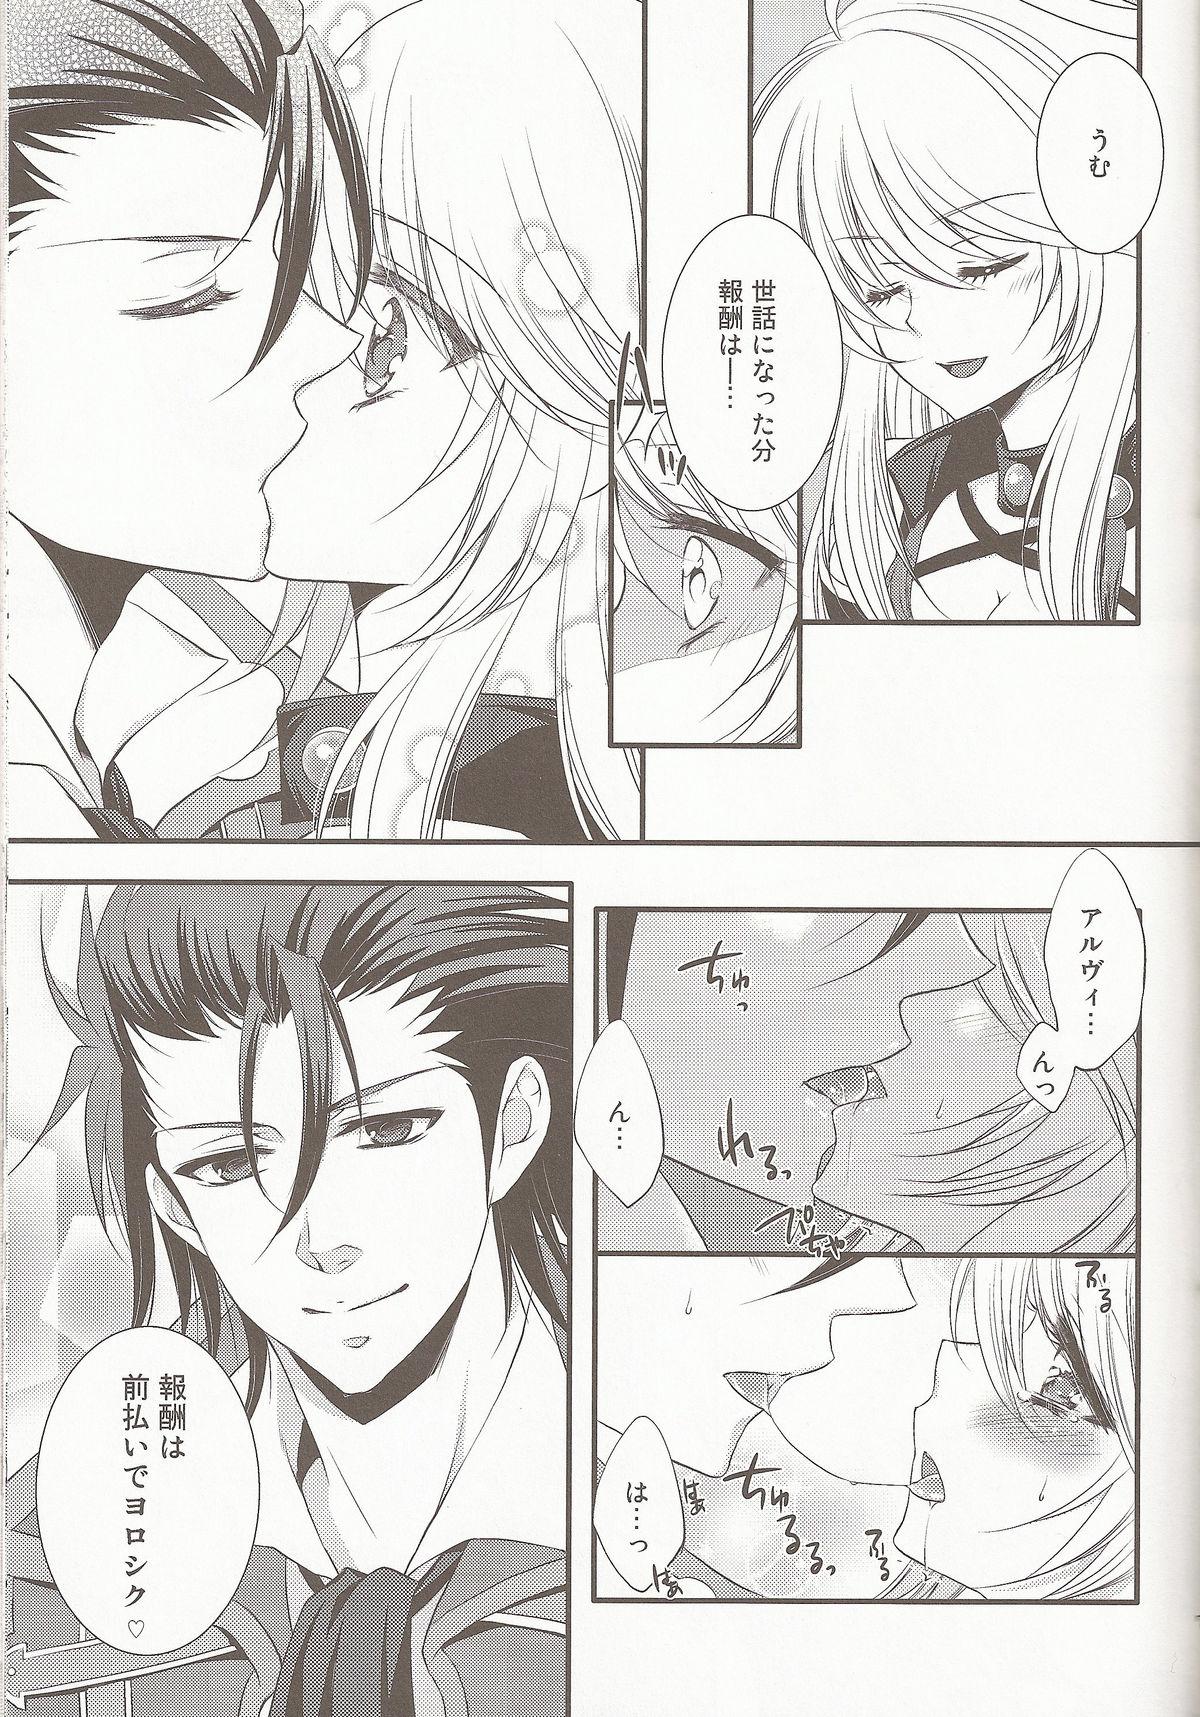 Que External Link - Tales of xillia Blows - Page 7